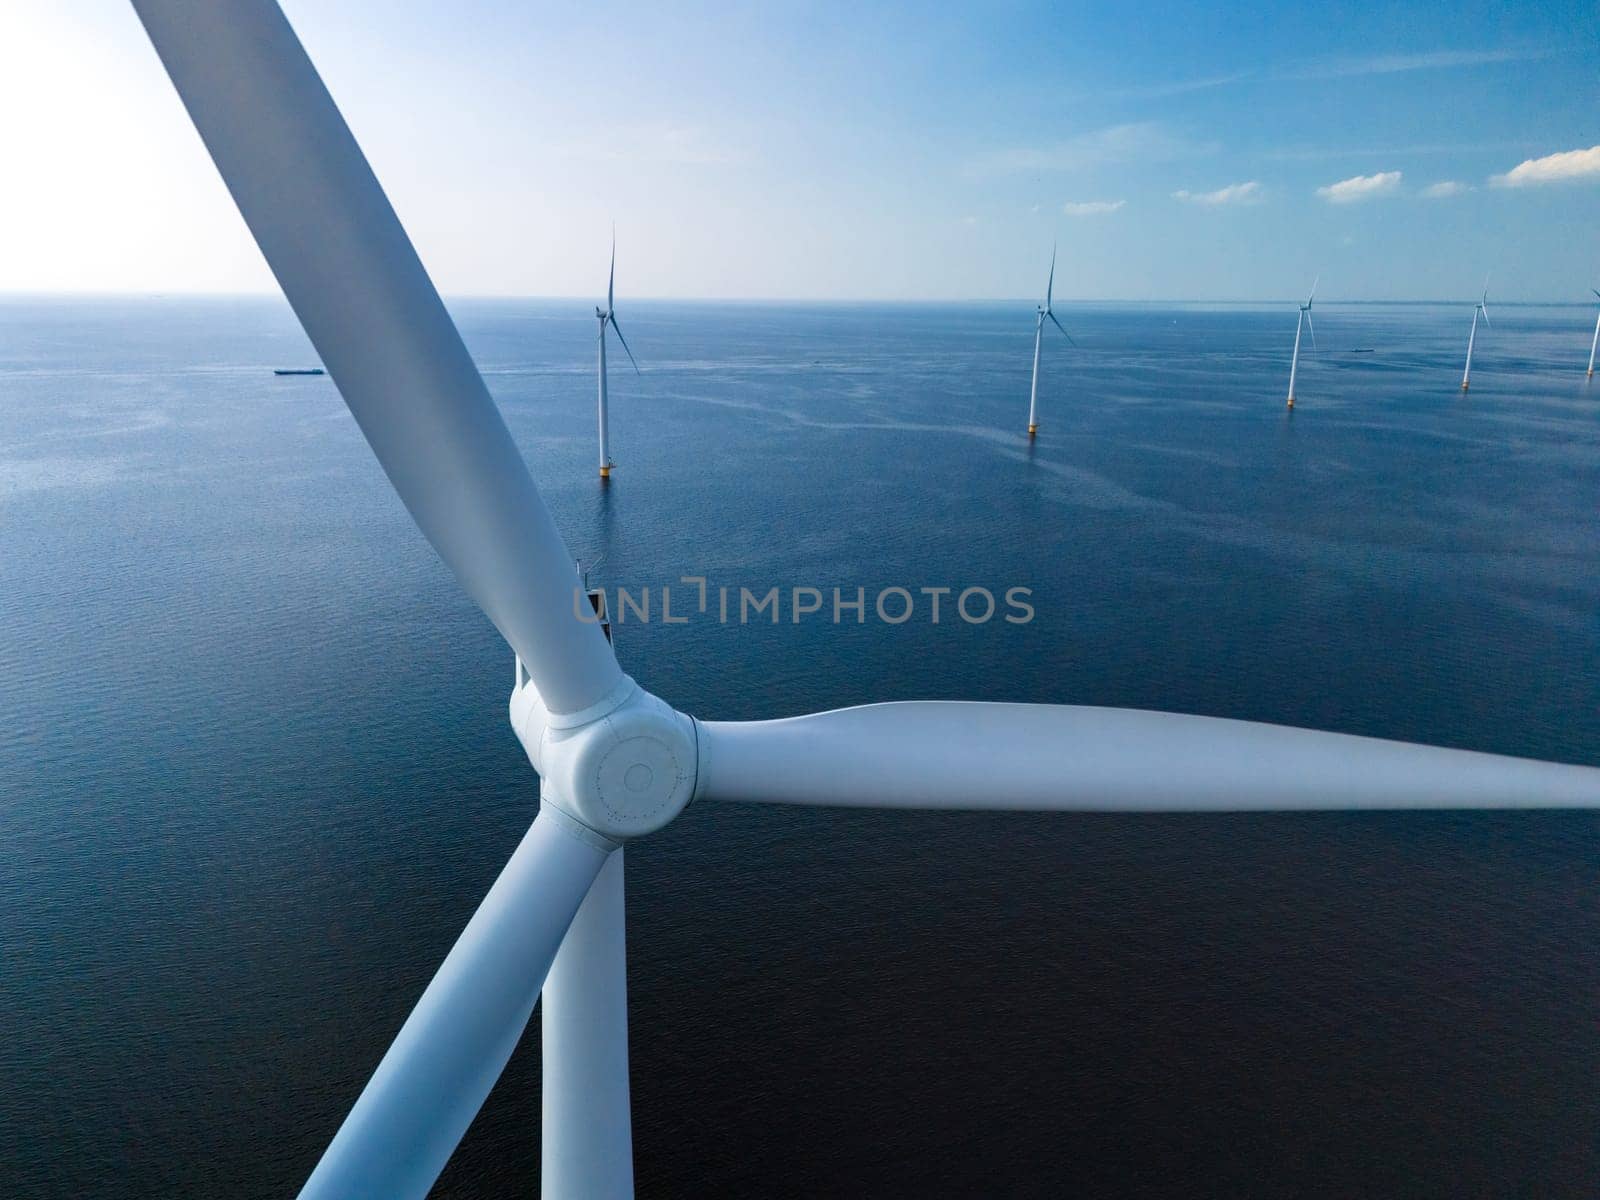 Windmills stand tall in the middle of the ocean, generating clean energy for the Netherlands from the strong sea breezes by fokkebok